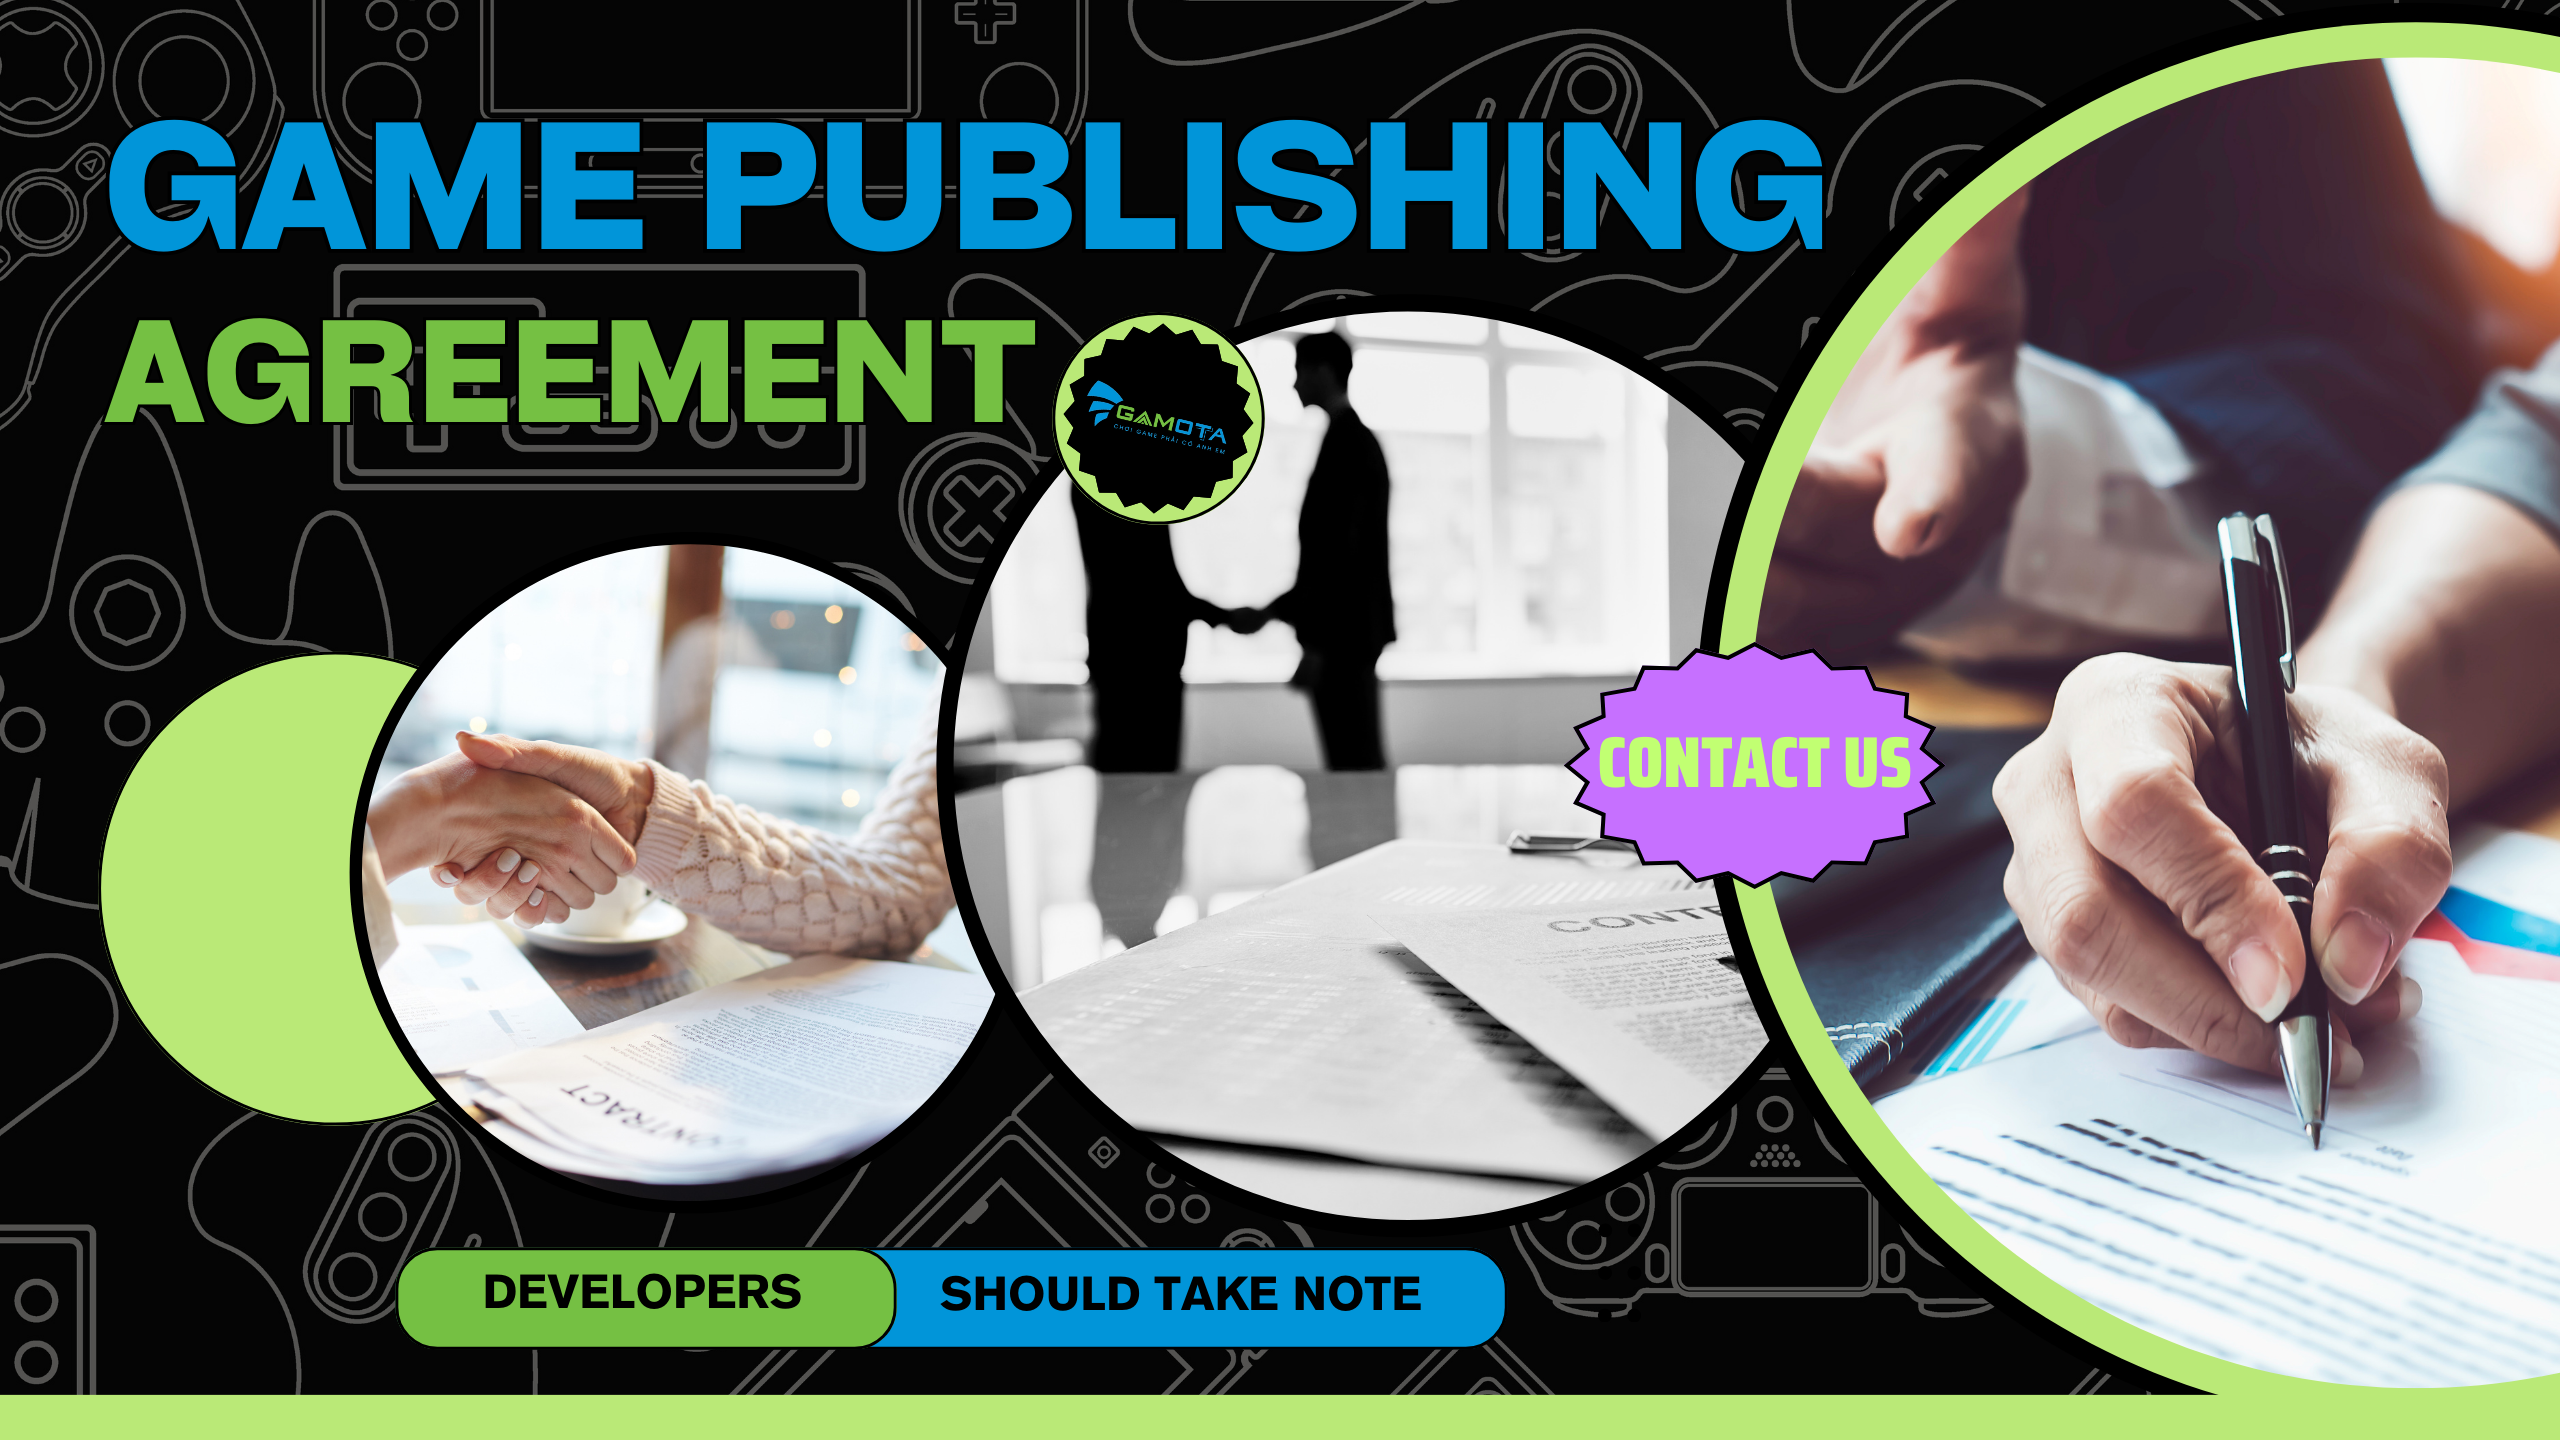 Game Publishing Agreement: Things to Take Note